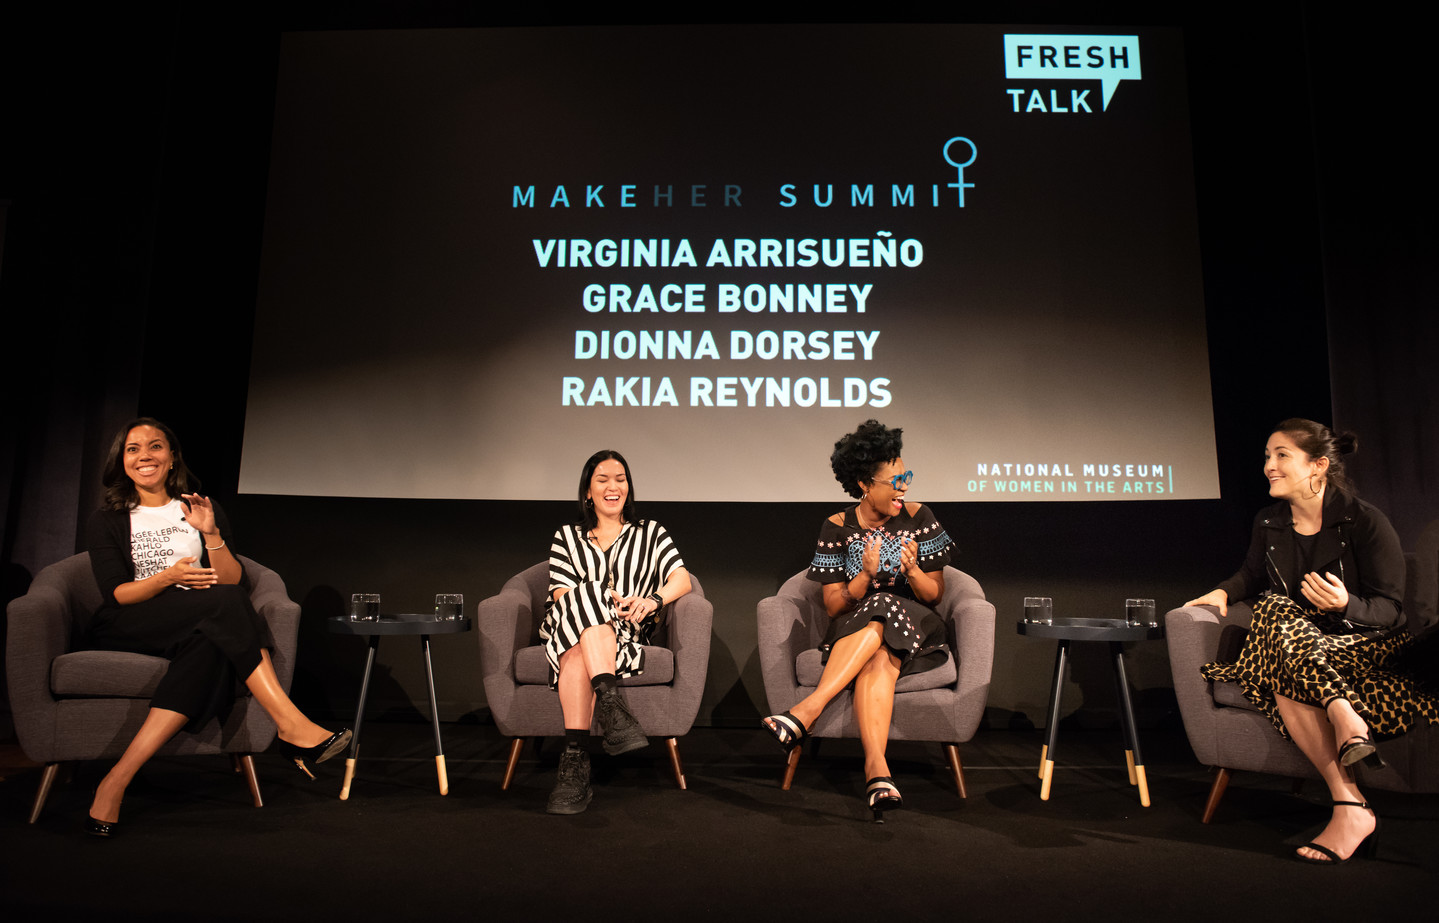 Four women sit in armchairs on a stage. They are engaged in a lively conversation. Behind them a projection reads “MakeHer Summit: Virginia Arrisueño, Grace Bonney, Dionna Dorsey, Rakia Reynolds.” There is a Fresh Talk logo in the top corner of the screen and a National Museum of Women in the Arts logo in the bottom corner.